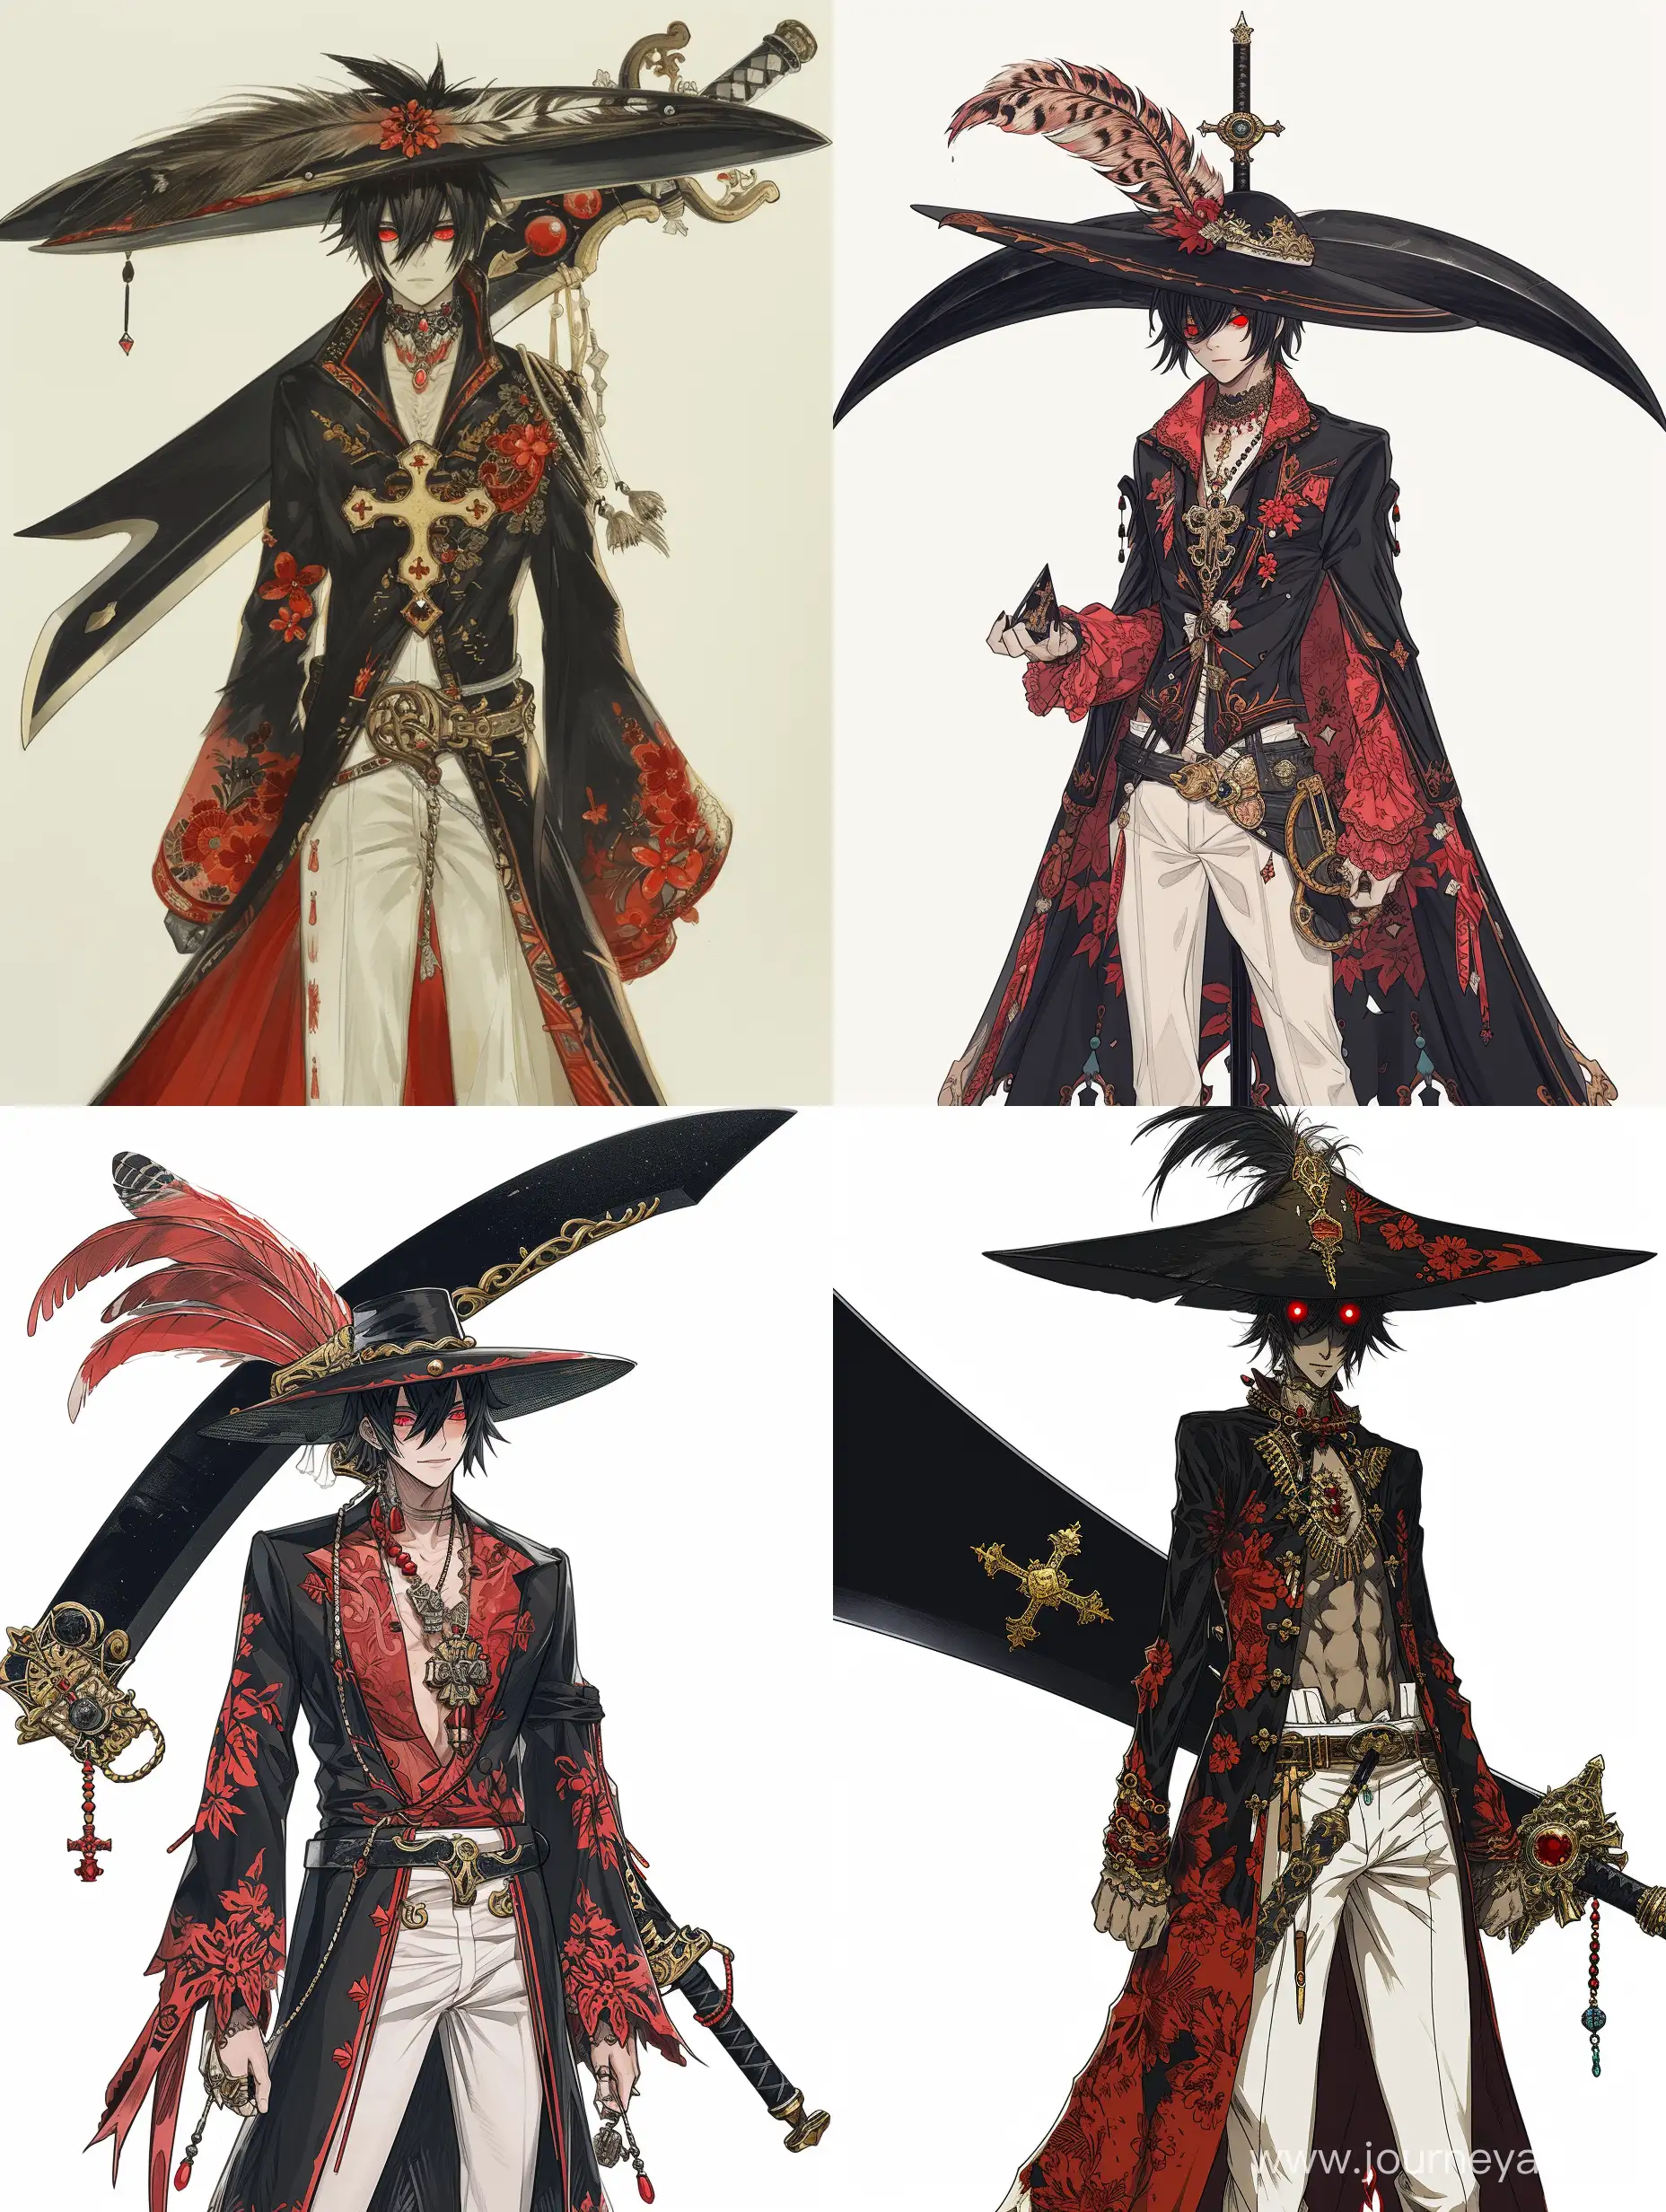 Mysterious-FalconEyed-Swordsman-in-Ornate-Red-and-Black-Attire